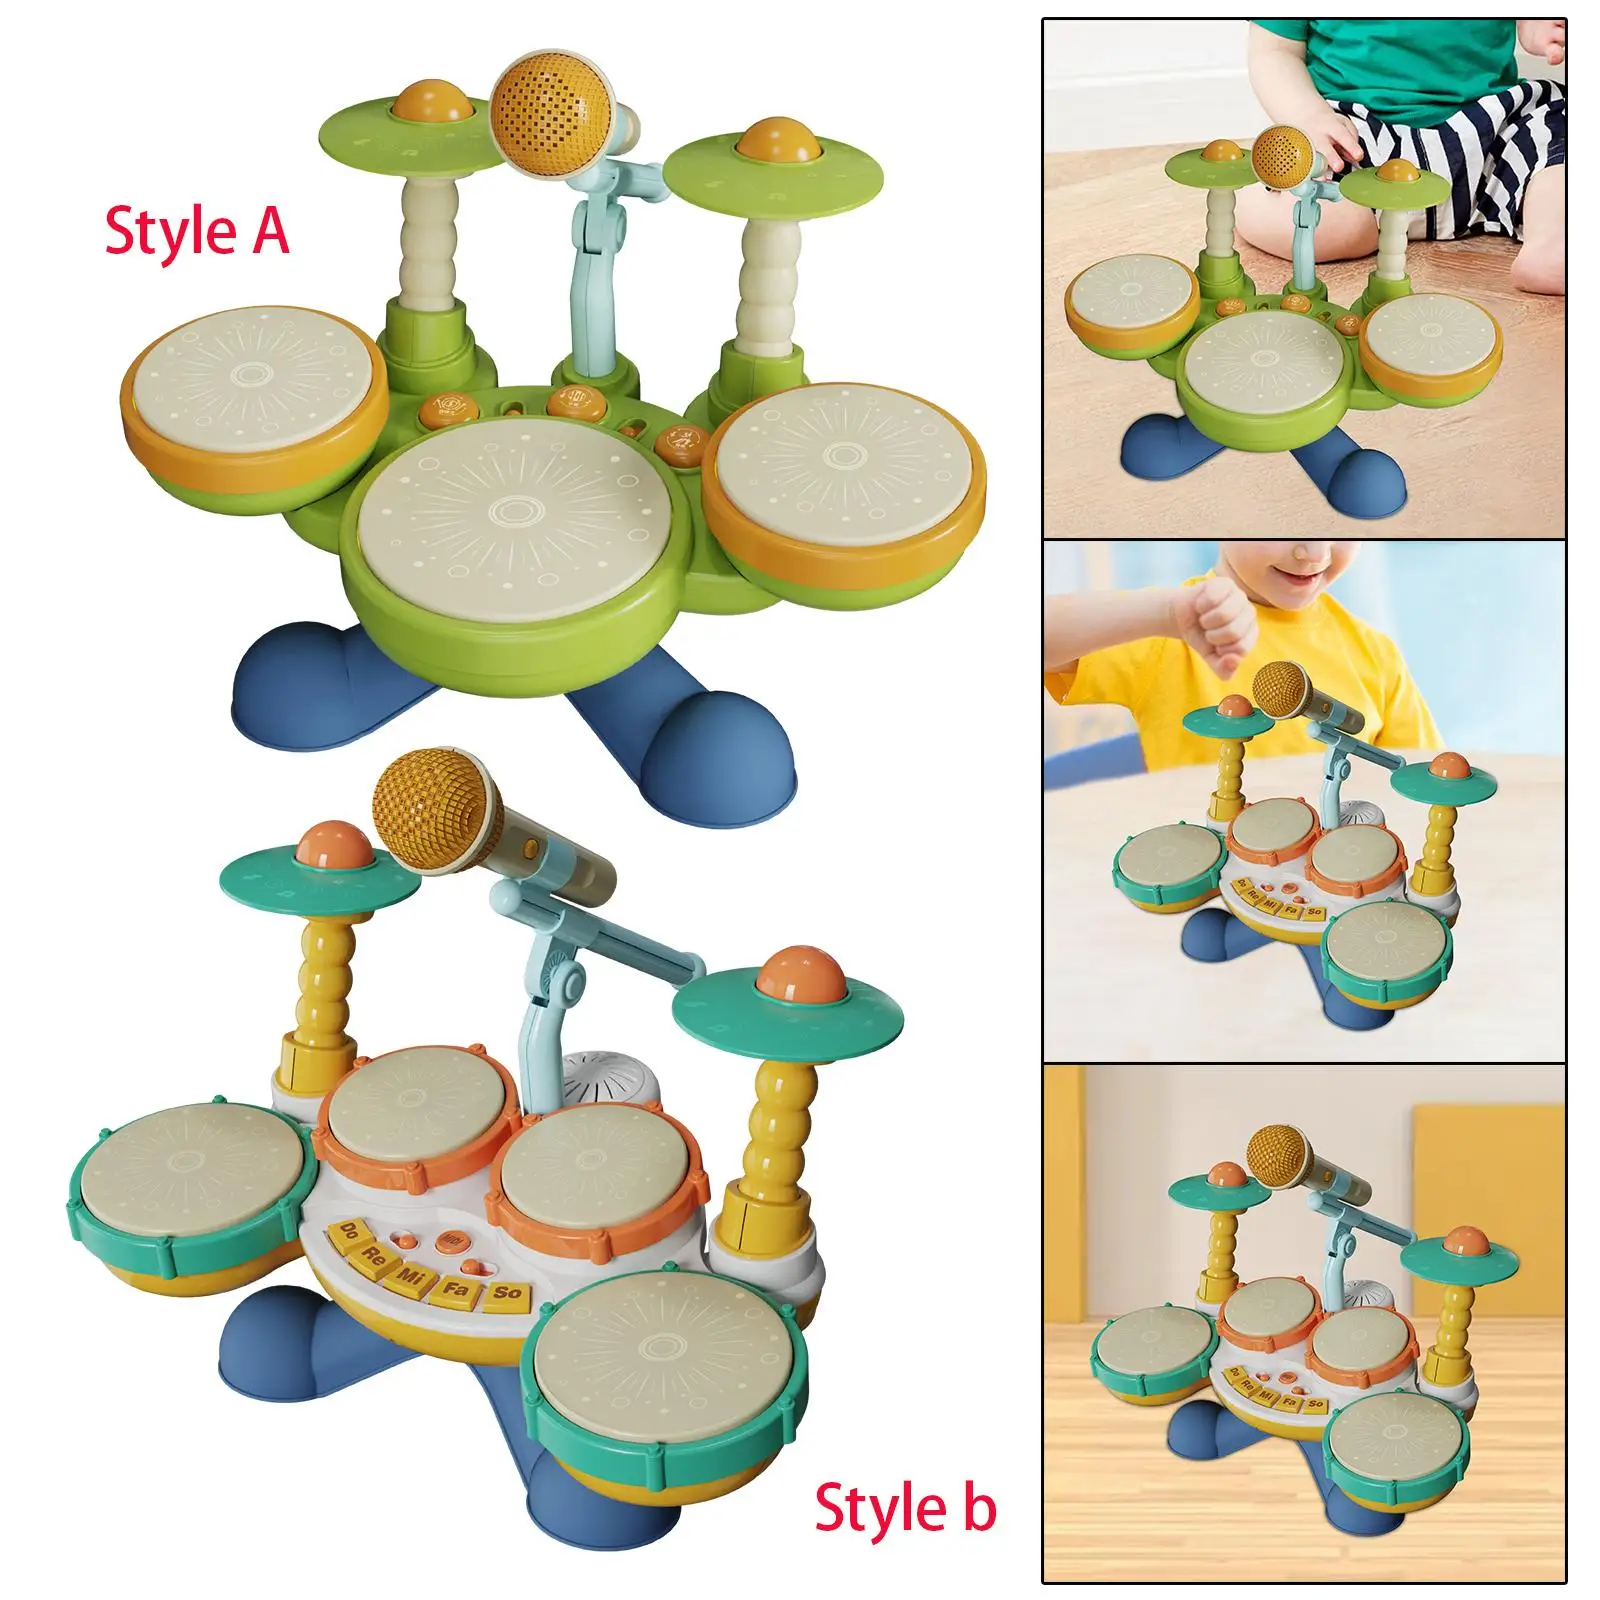 Baby Toys 12 to 18 Months Birthday Gift Wear Resistant Baby Baby Drum Set